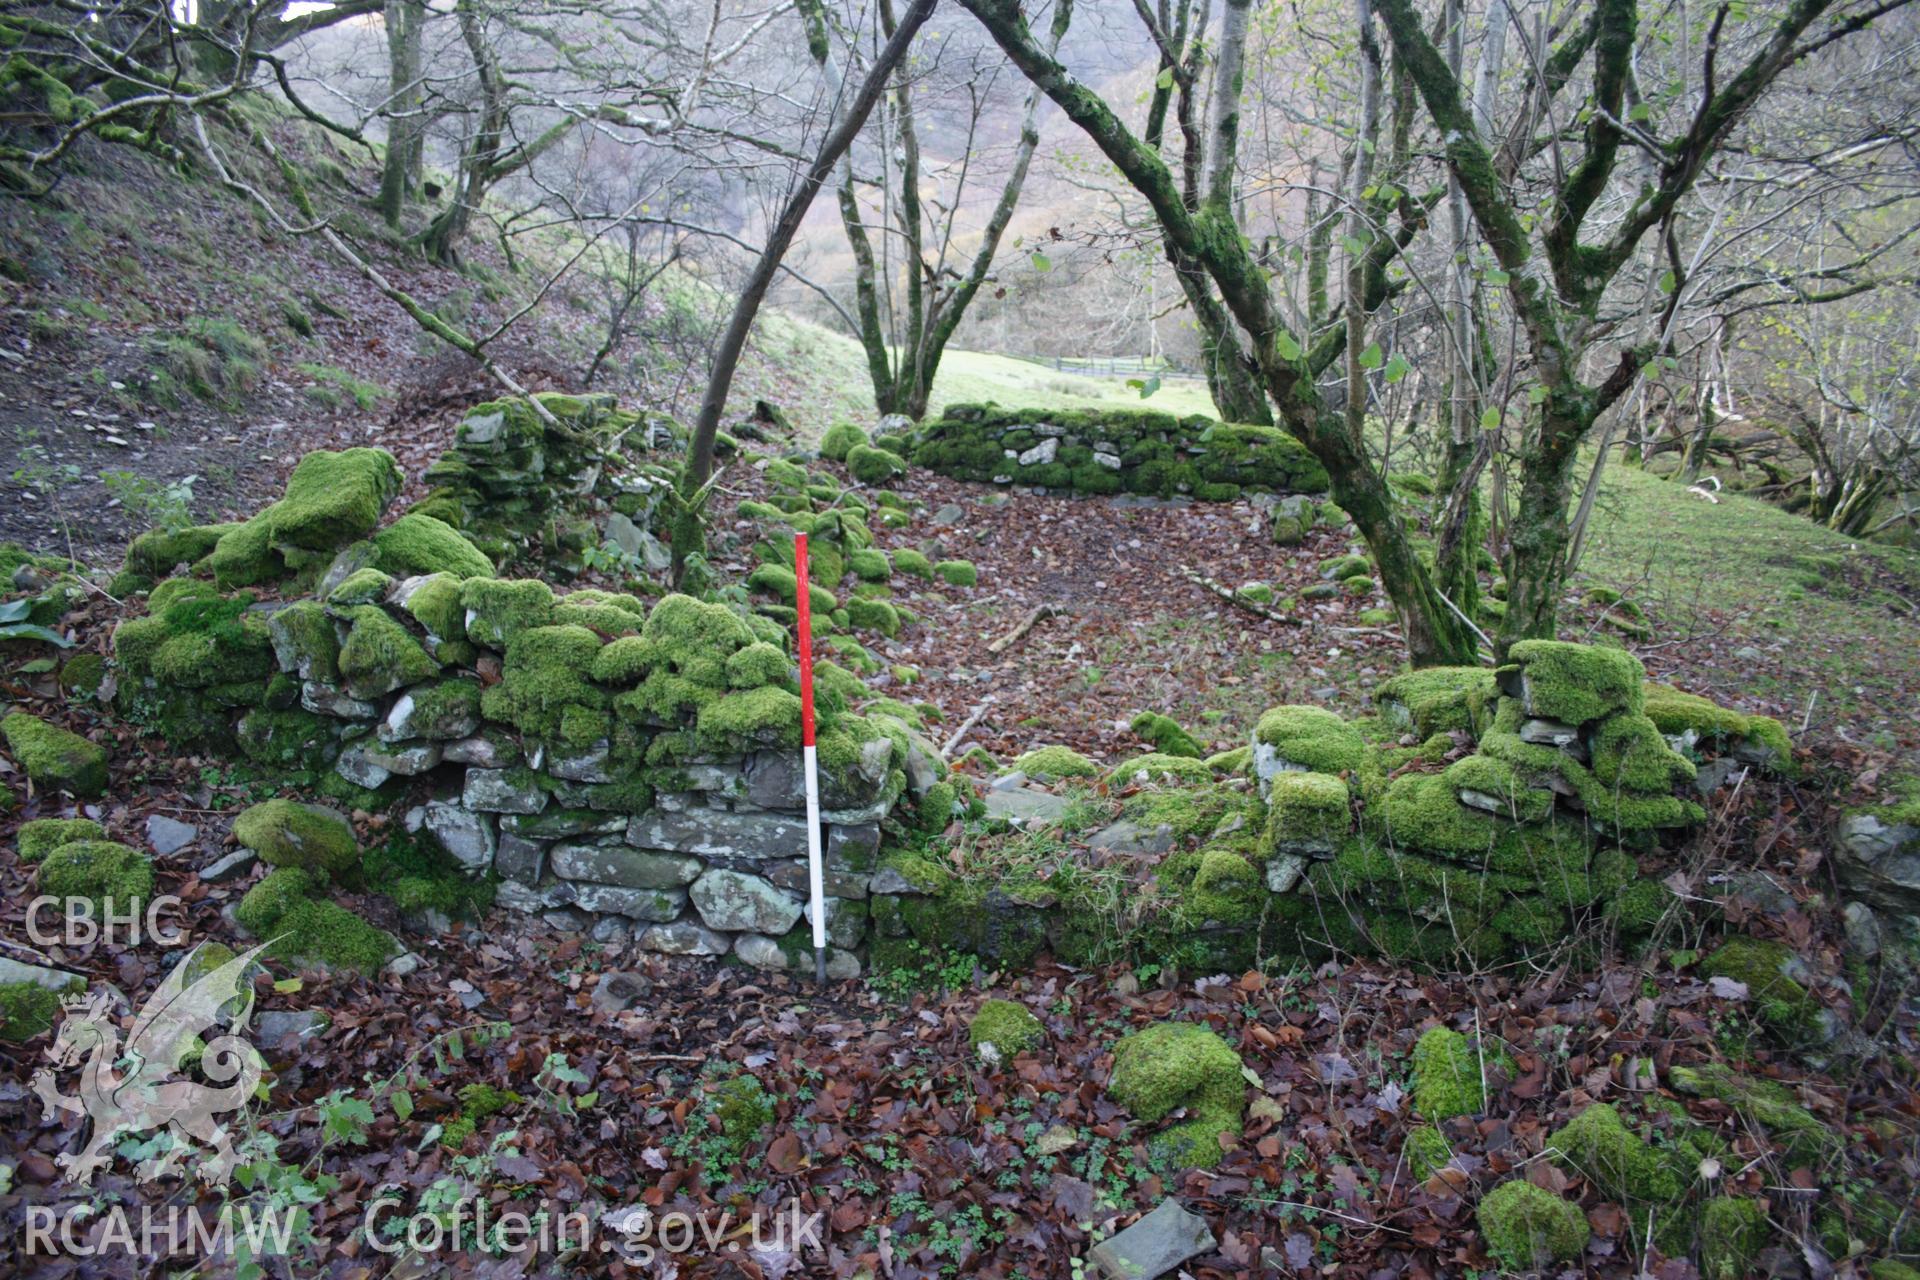 Digital colour photograph of Nant-y-Caws cottage taken on 03/03/2008 by D.E. Schlee during the Llyn Brianne Upland Survey undertaken by Dyfed Archaeological Trust.